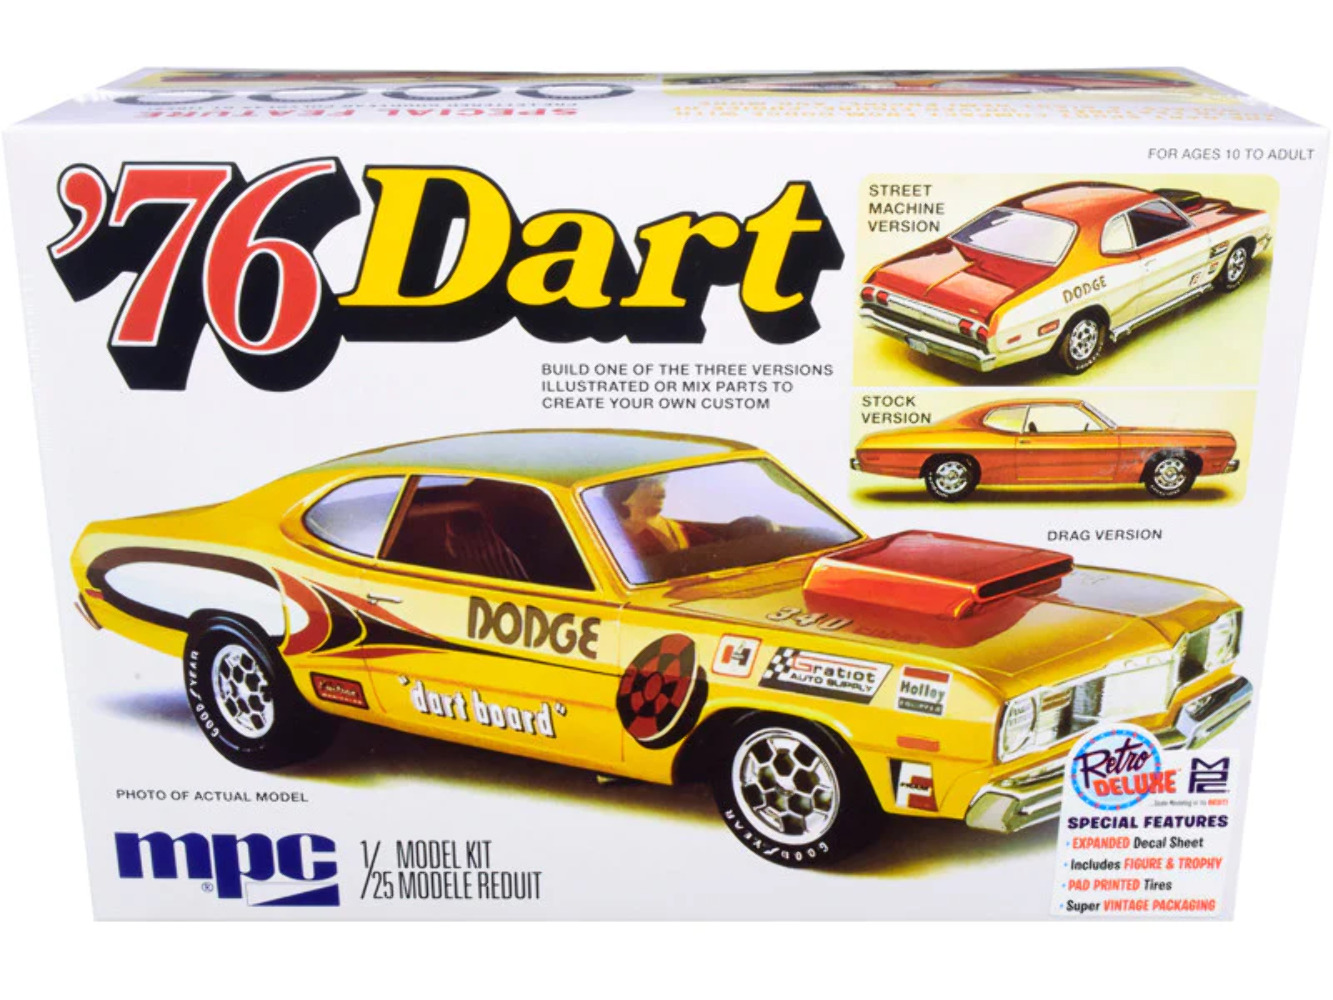 Skill 2 Model Kit 1976 Dodge Dart Sport with Two Figurines 3 in 1 Kit 1/25 Scale